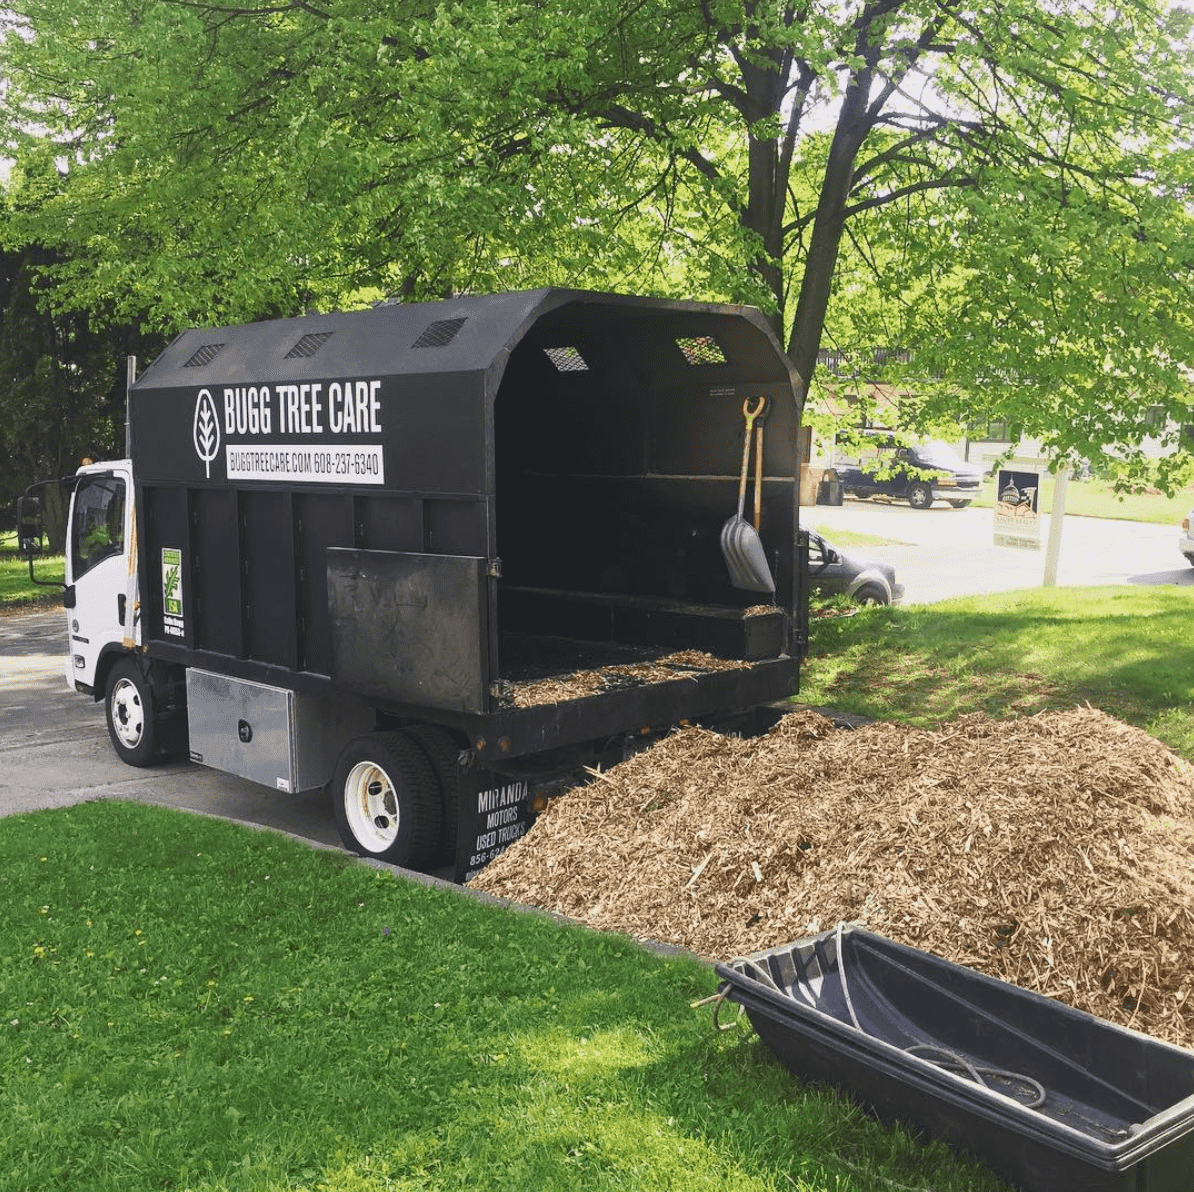 BUGG TREE CARE free wood chip delivery